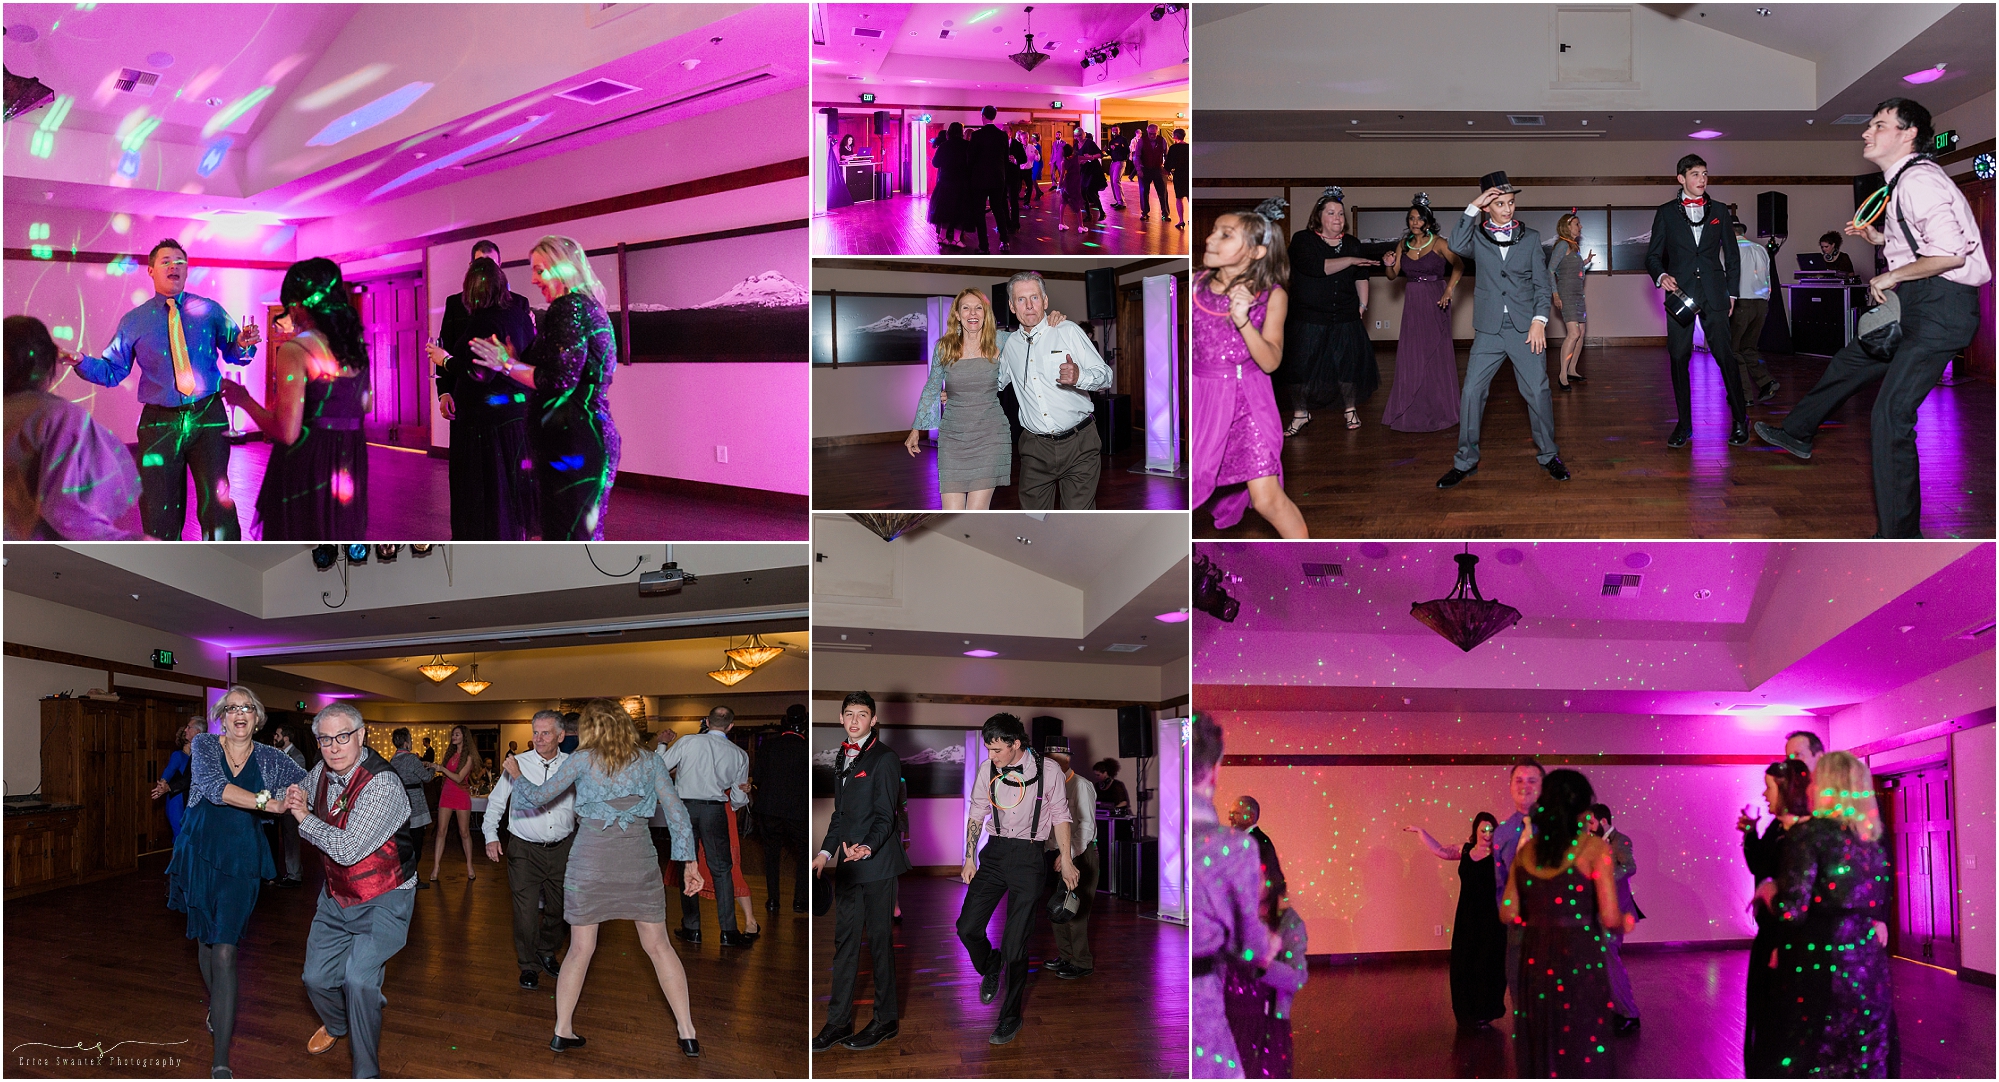 Dance floor packed with tunes spun by DJ Kurlz with Flip Flop Sounds for this Sisters Oregon Winter wedding at Five Pine Lodge, captured by Erica Swantek Photography. 